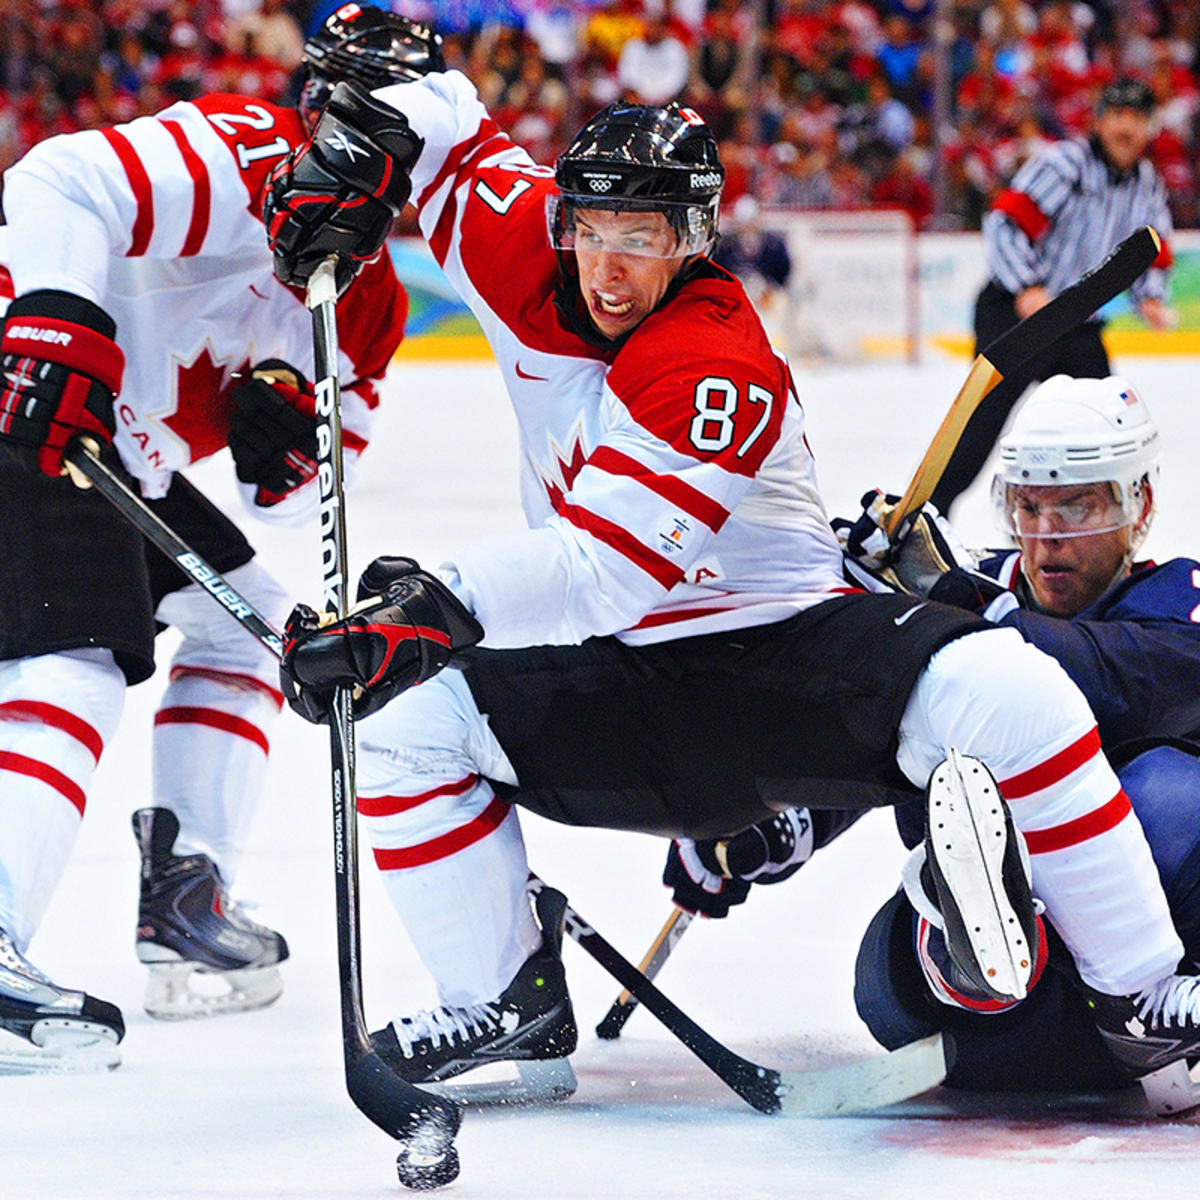 Sidney Crosby's golden goal lifts Canada in epic 2010 gold medal final